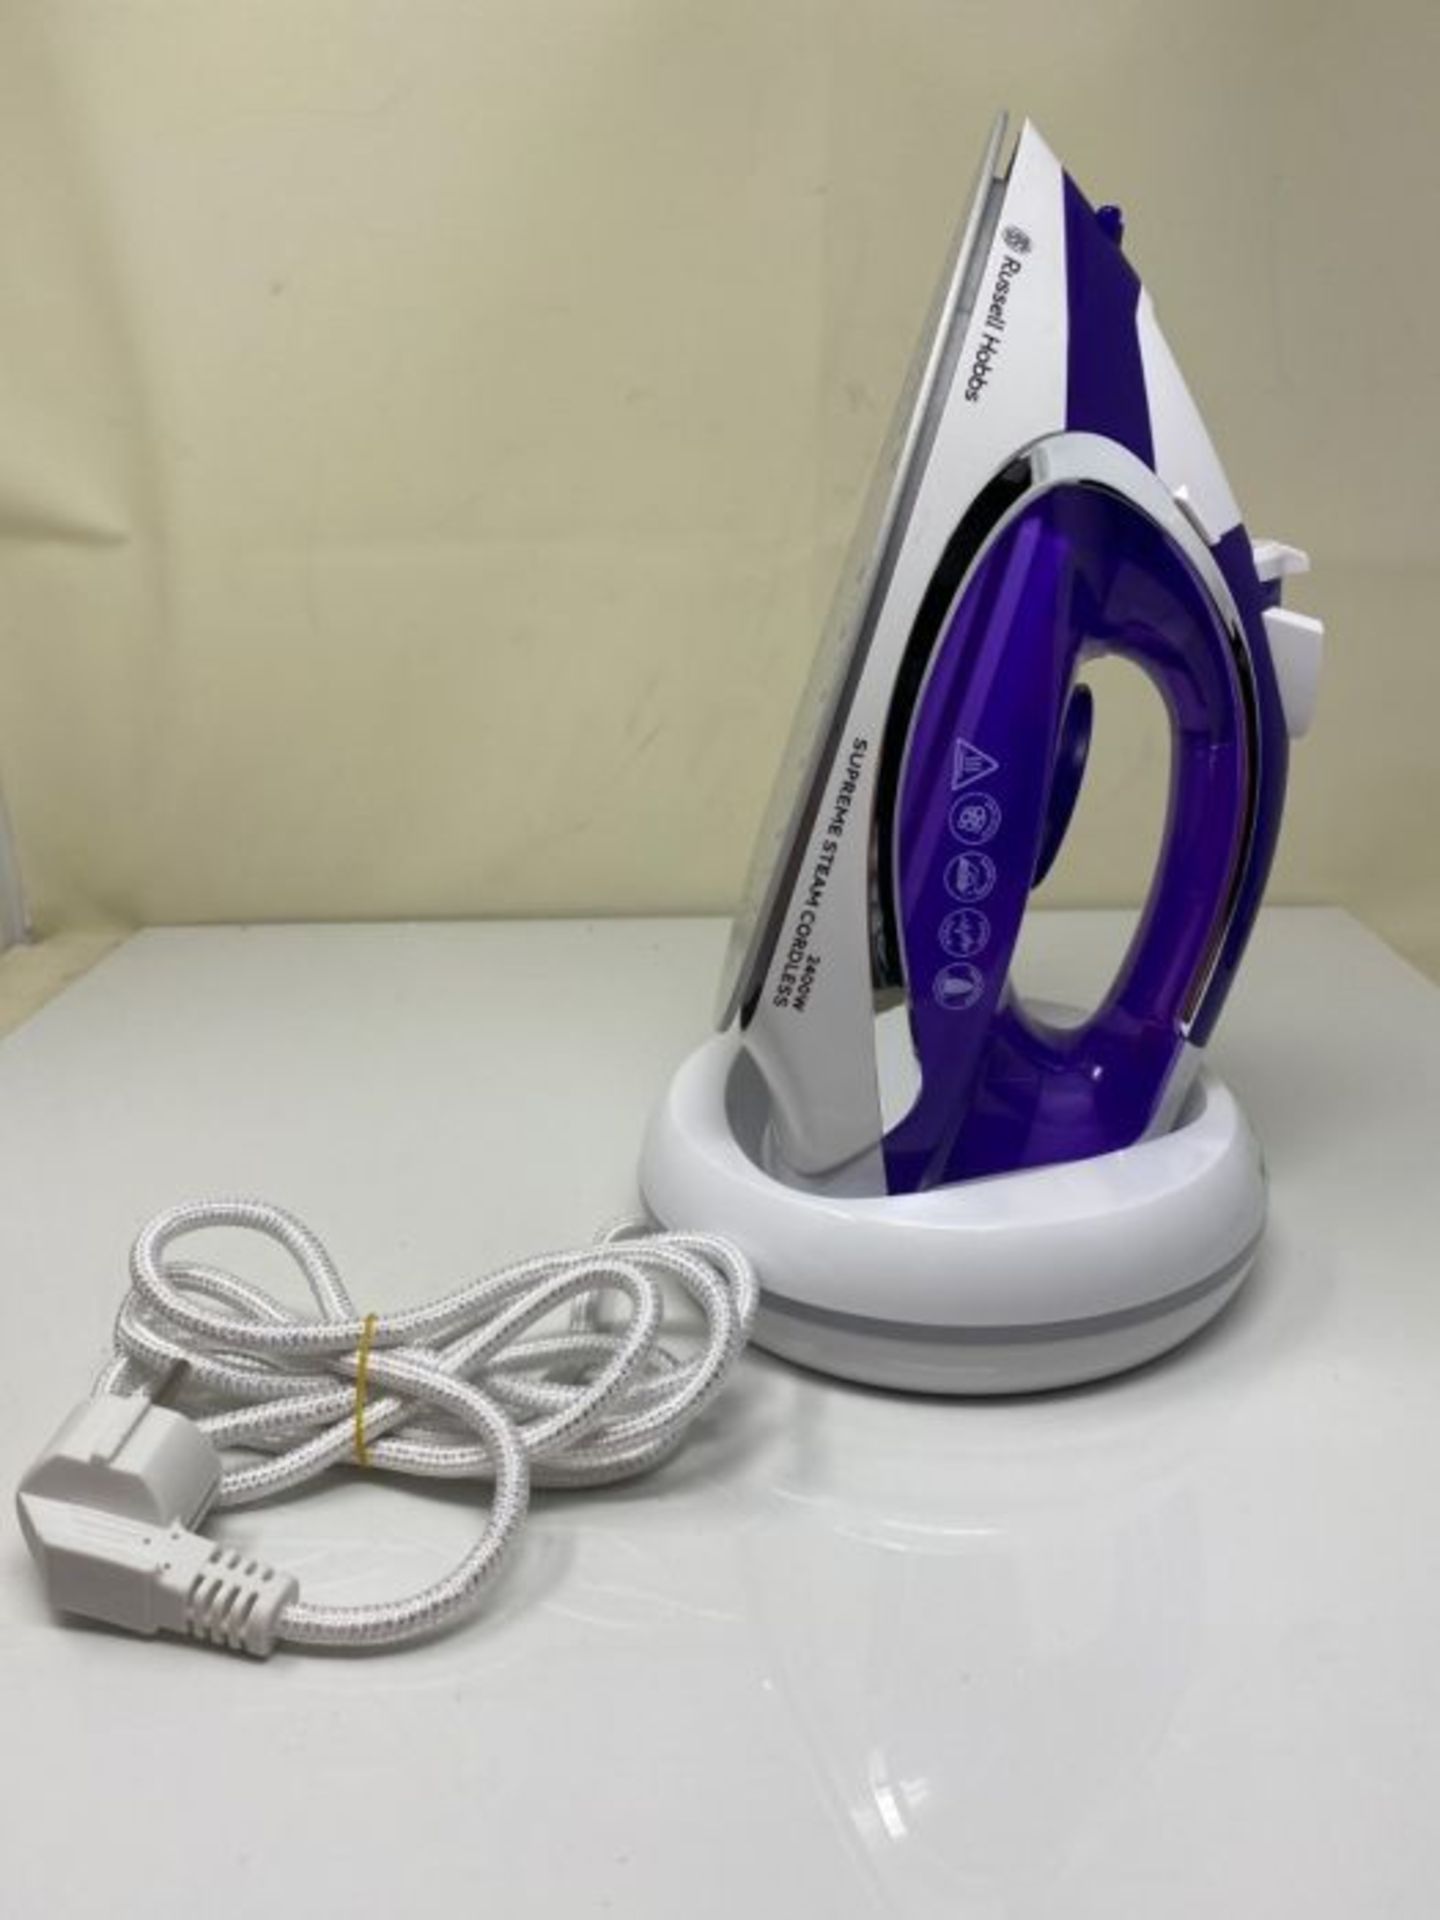 RRP £56.00 Russell Hobbs 23300-56 Steam Iron Supreme steam-23300-56, Blue, White - Image 3 of 3